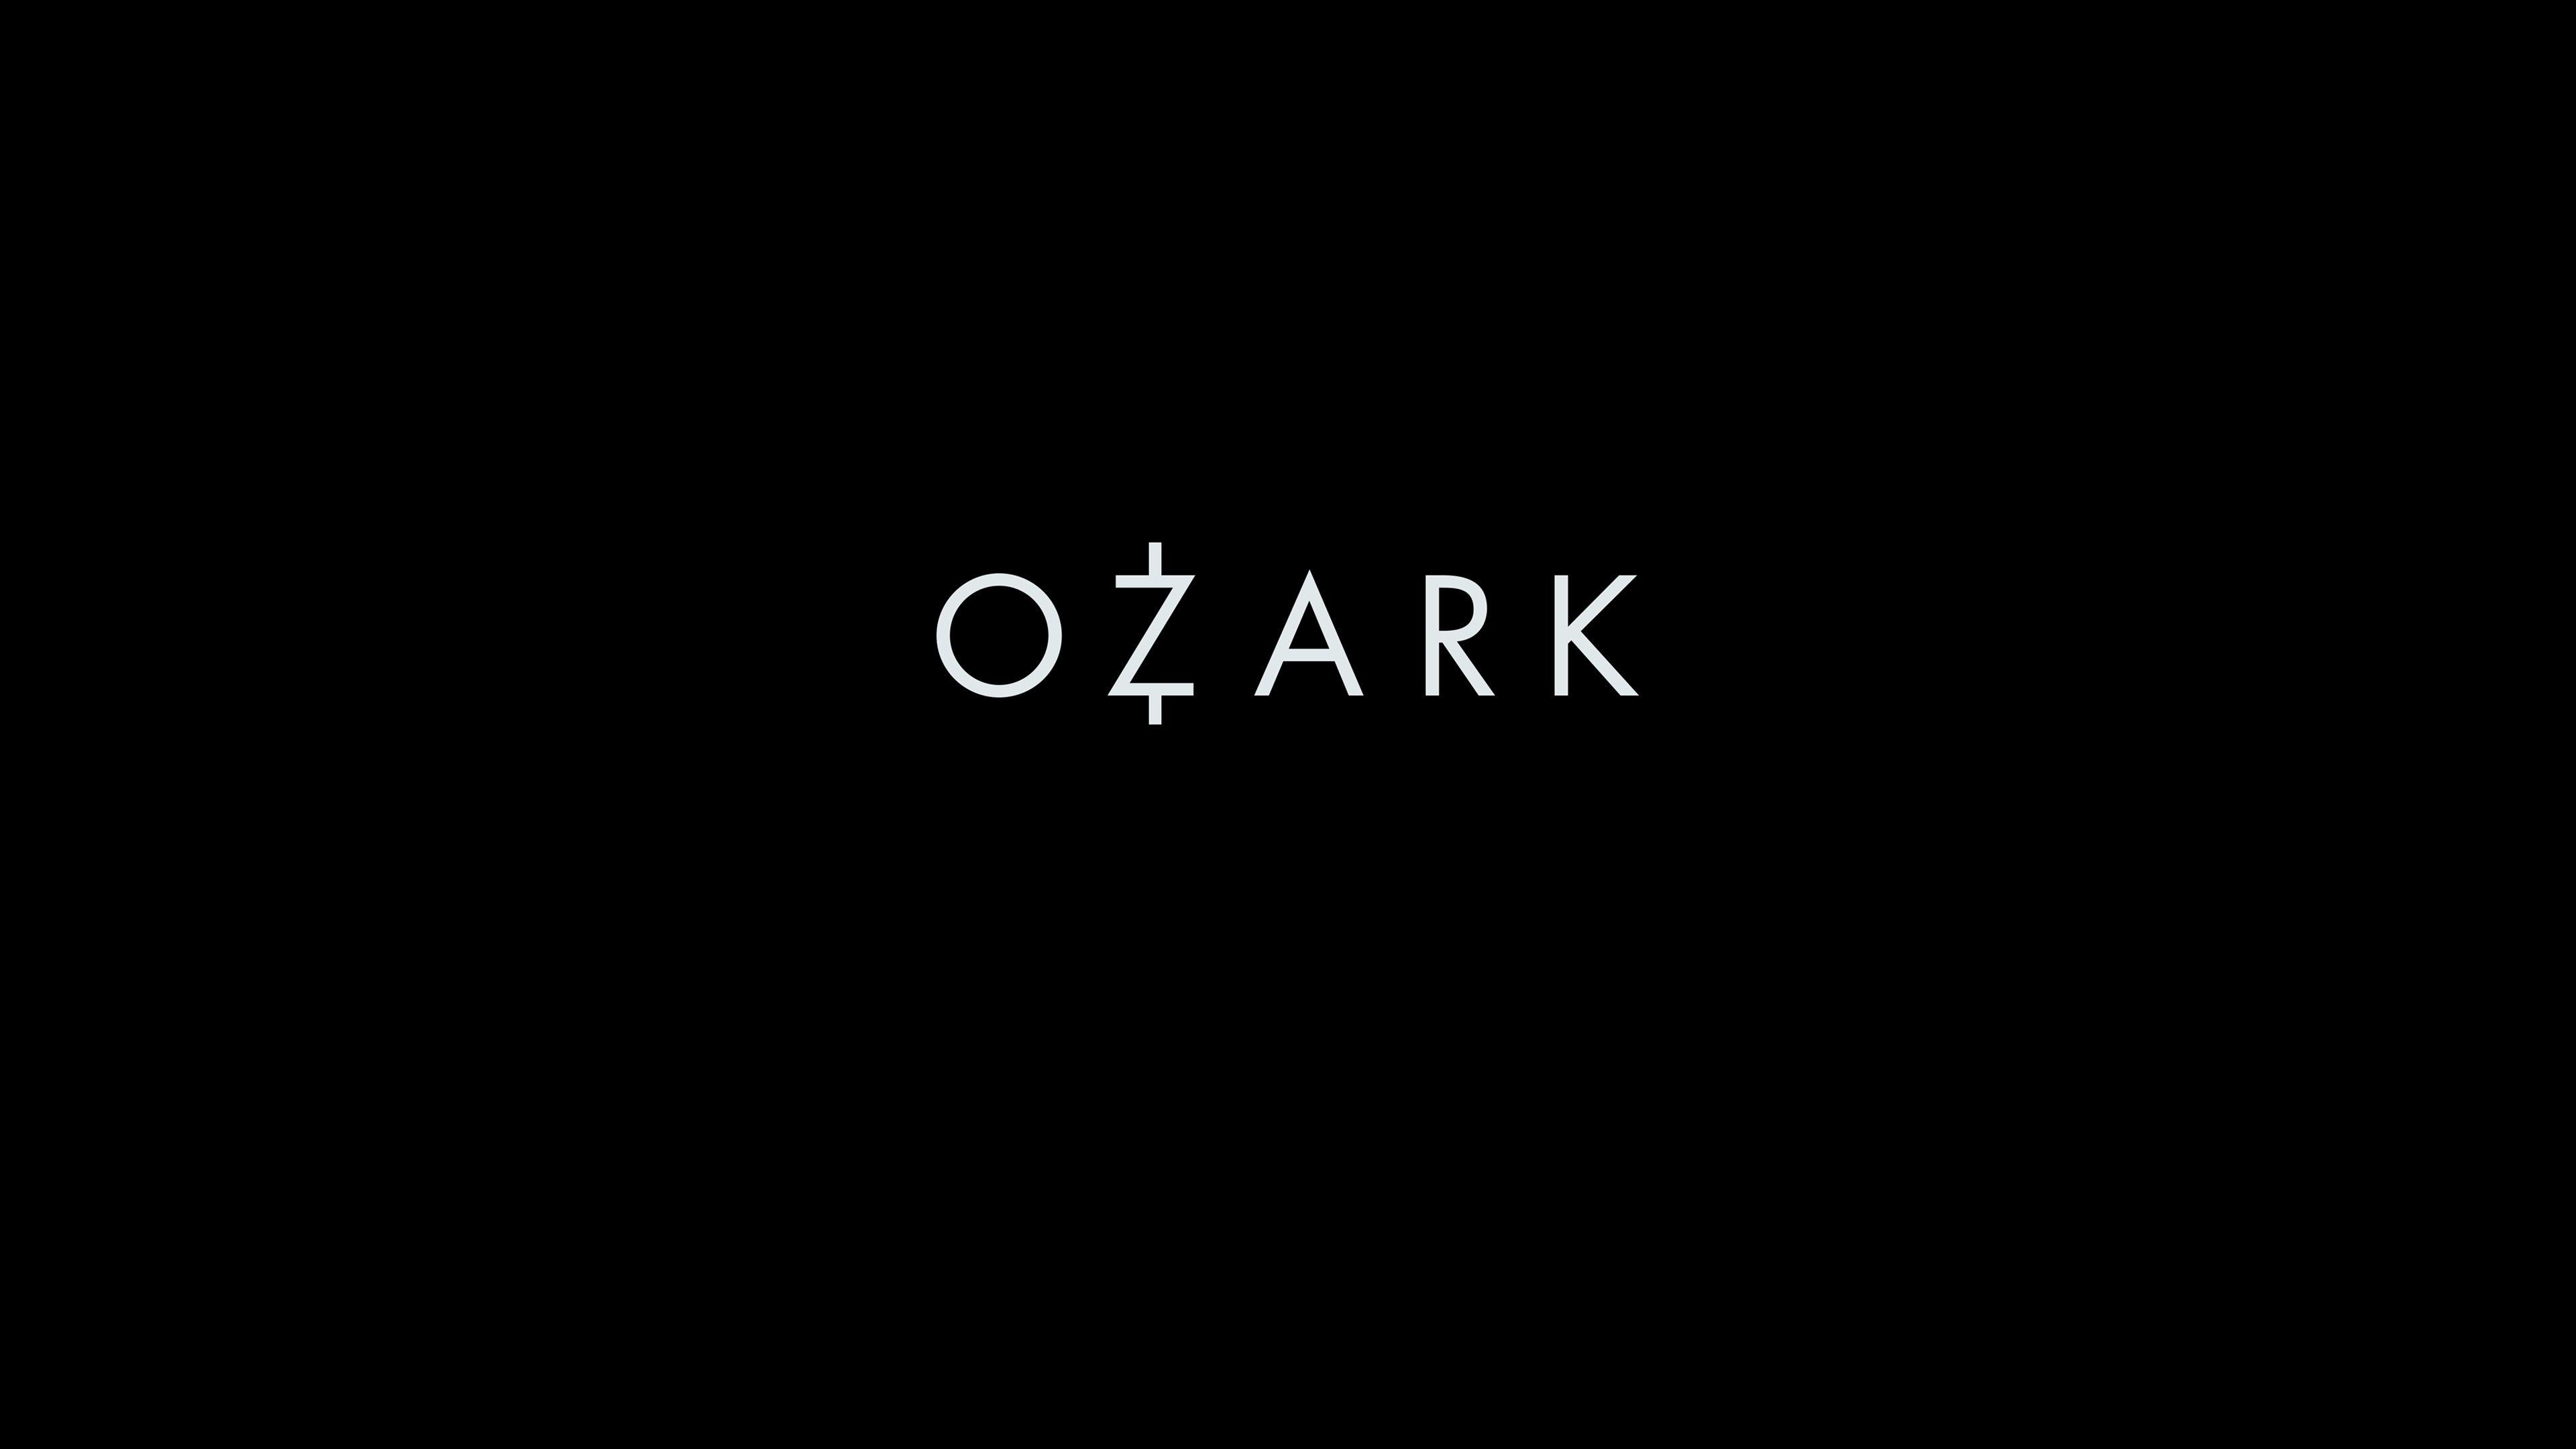 Ozark Background Awesome HD Wallpaper